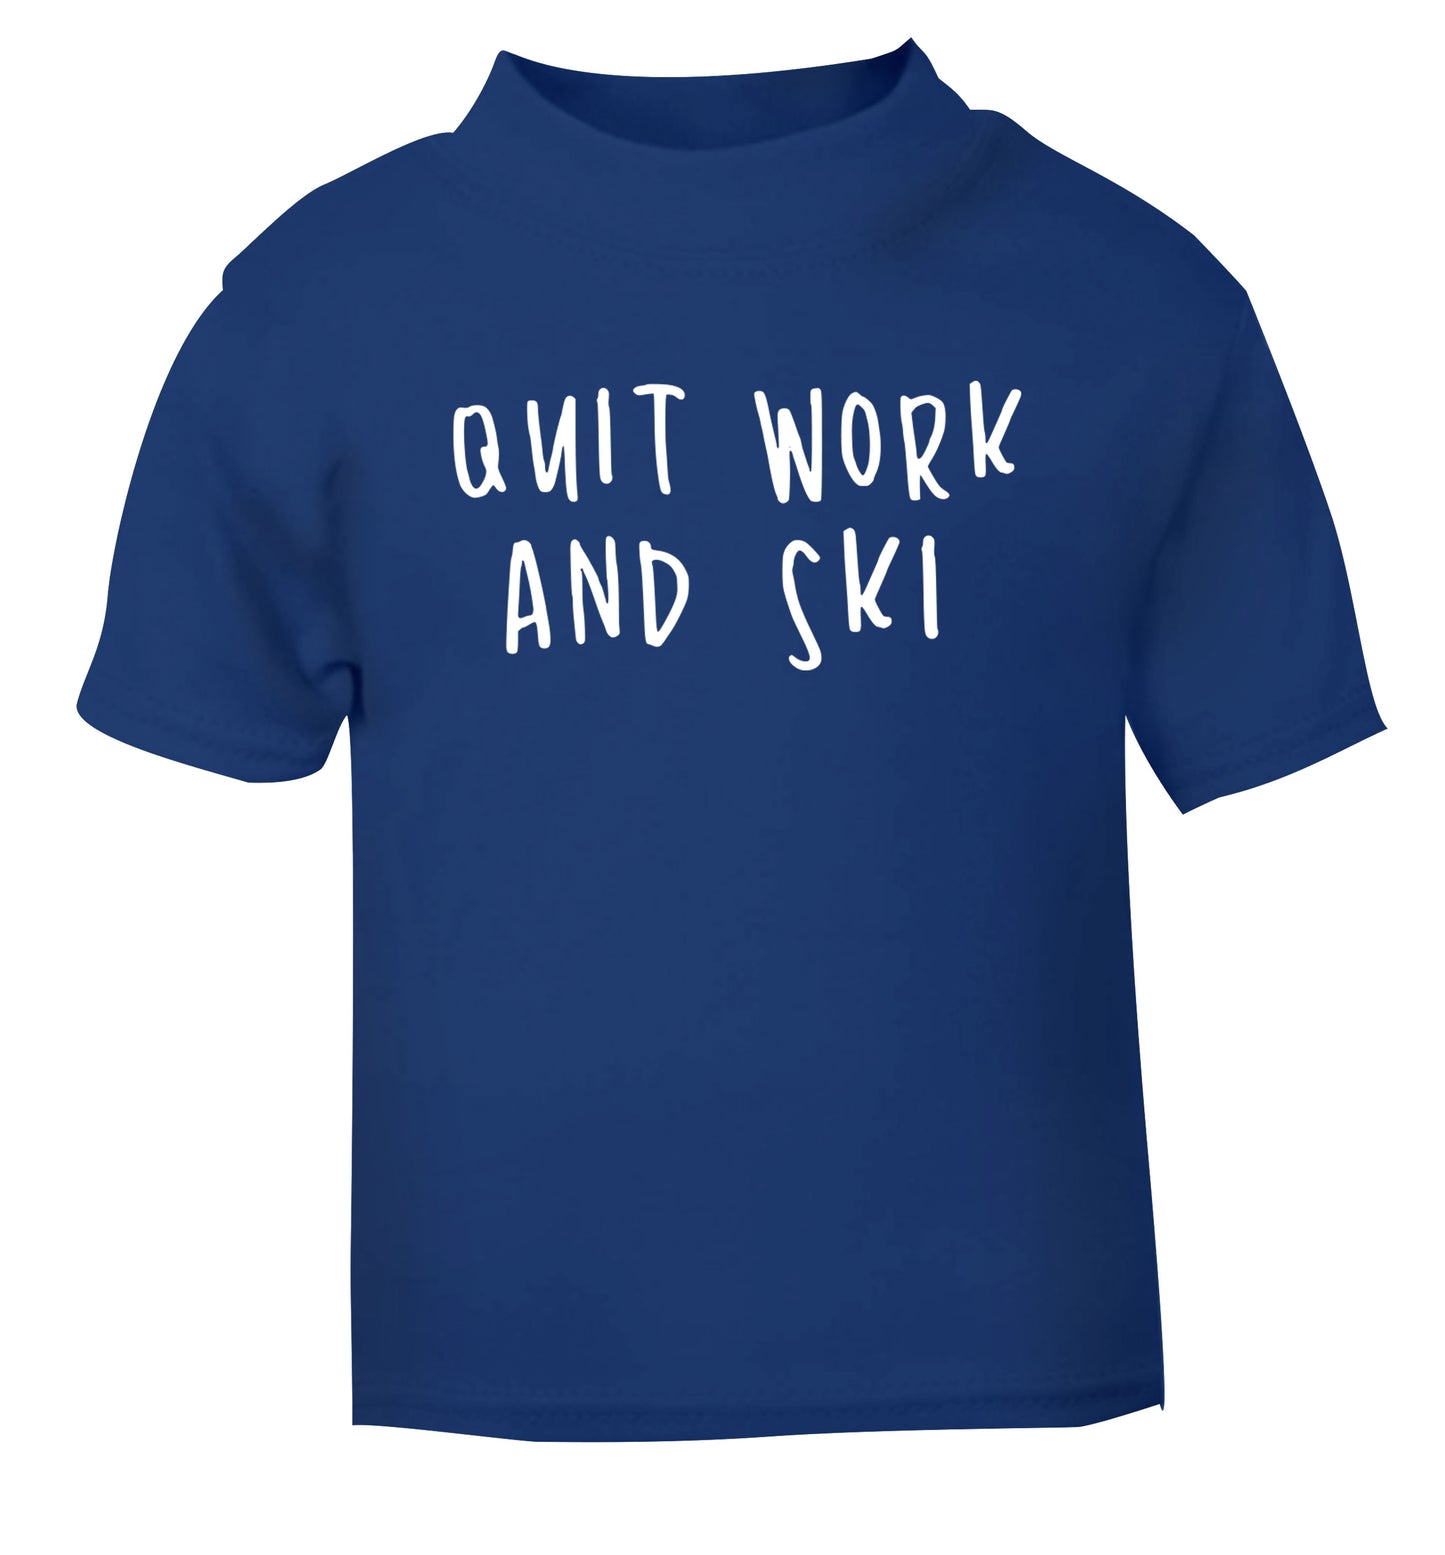 Quit work and ski blue Baby Toddler Tshirt 2 Years